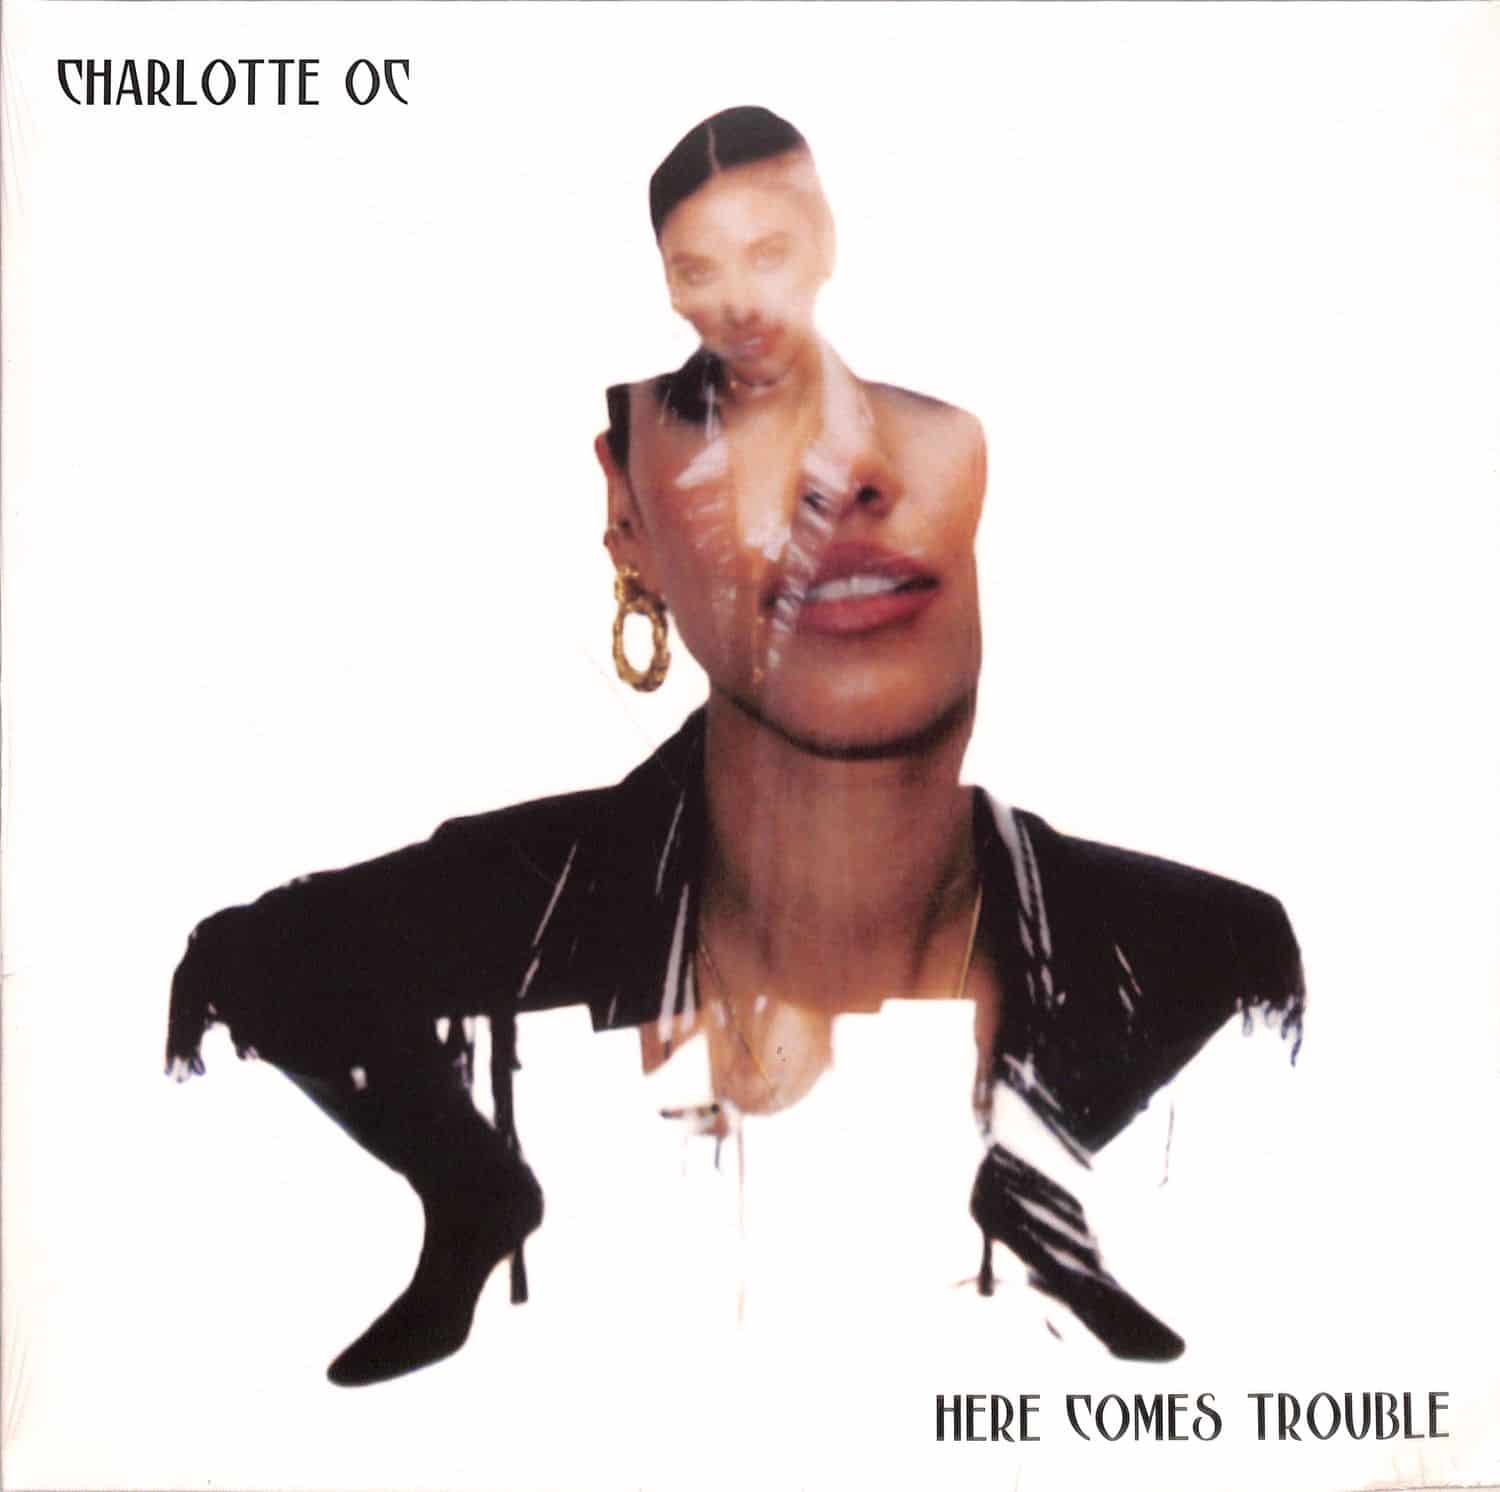 Charlotte OC - HERE COMES TROUBLE 